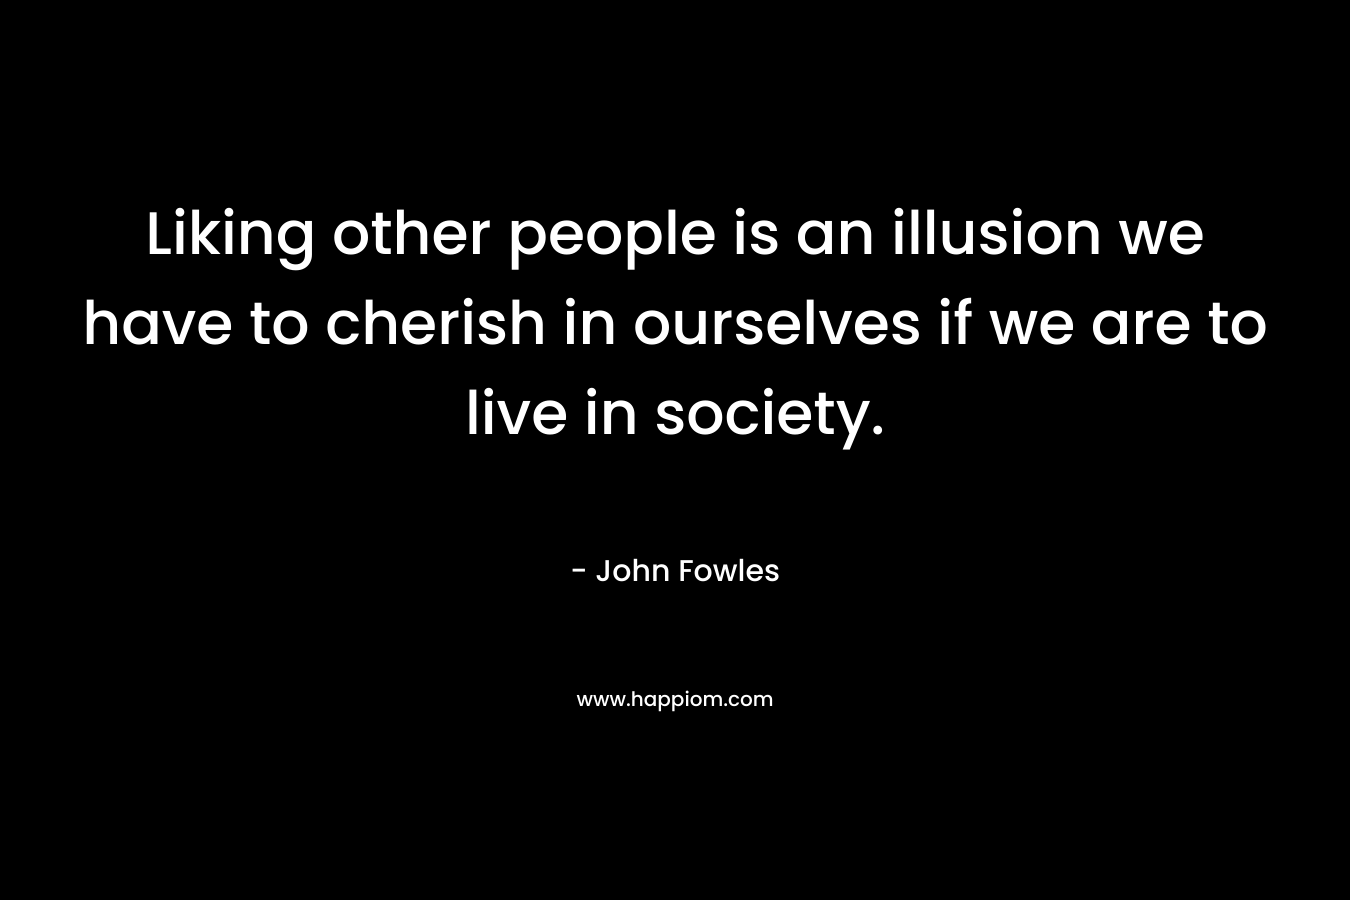 Liking other people is an illusion we have to cherish in ourselves if we are to live in society.